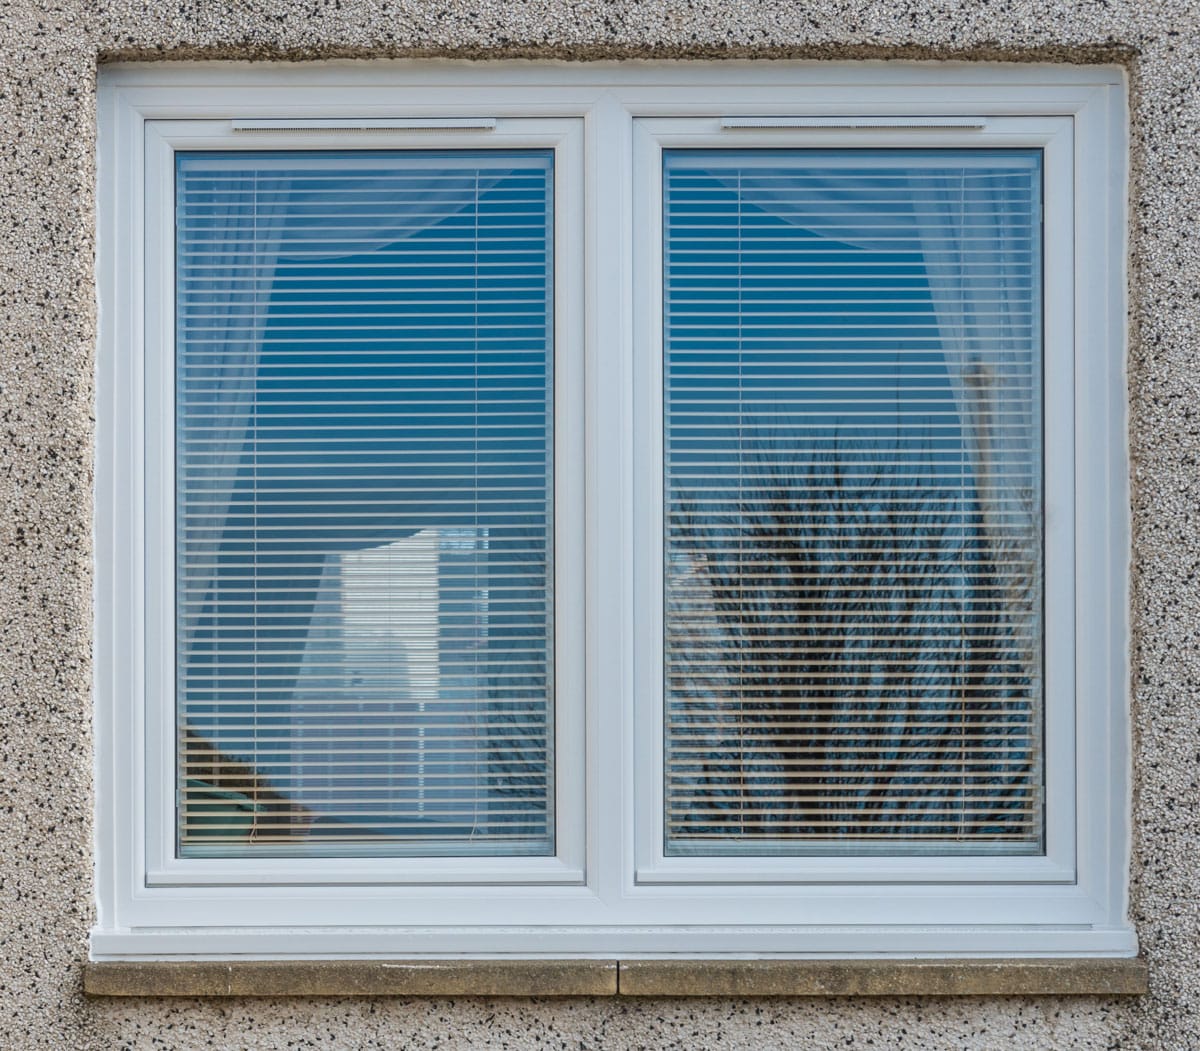 is double glazing better than triple glazing